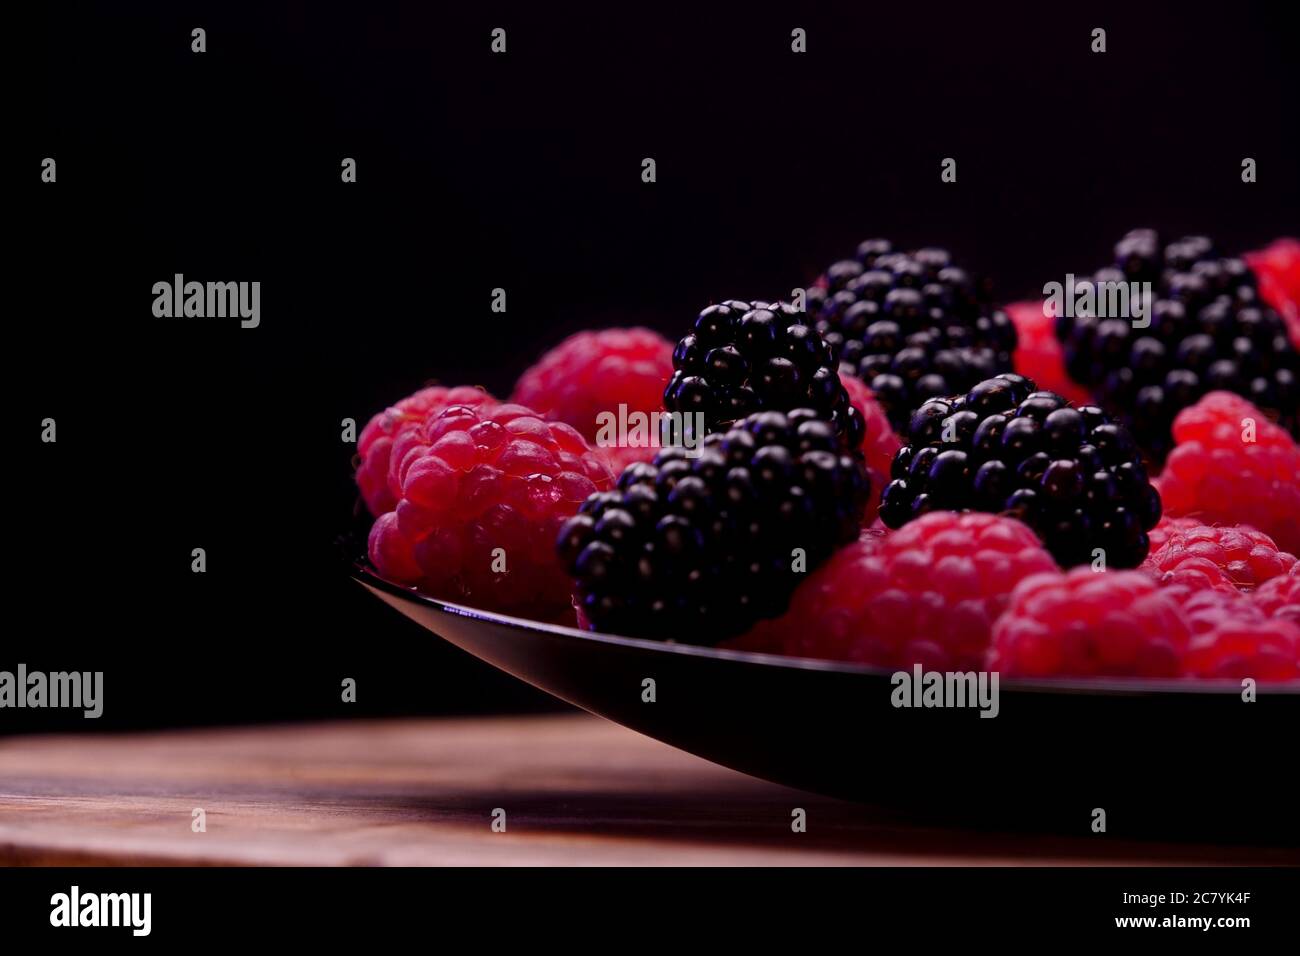 Blackberries and raspberries fruits composition on a black plate and black background. Fresh and tasty looking organic food for vegan in a summer seas Stock Photo